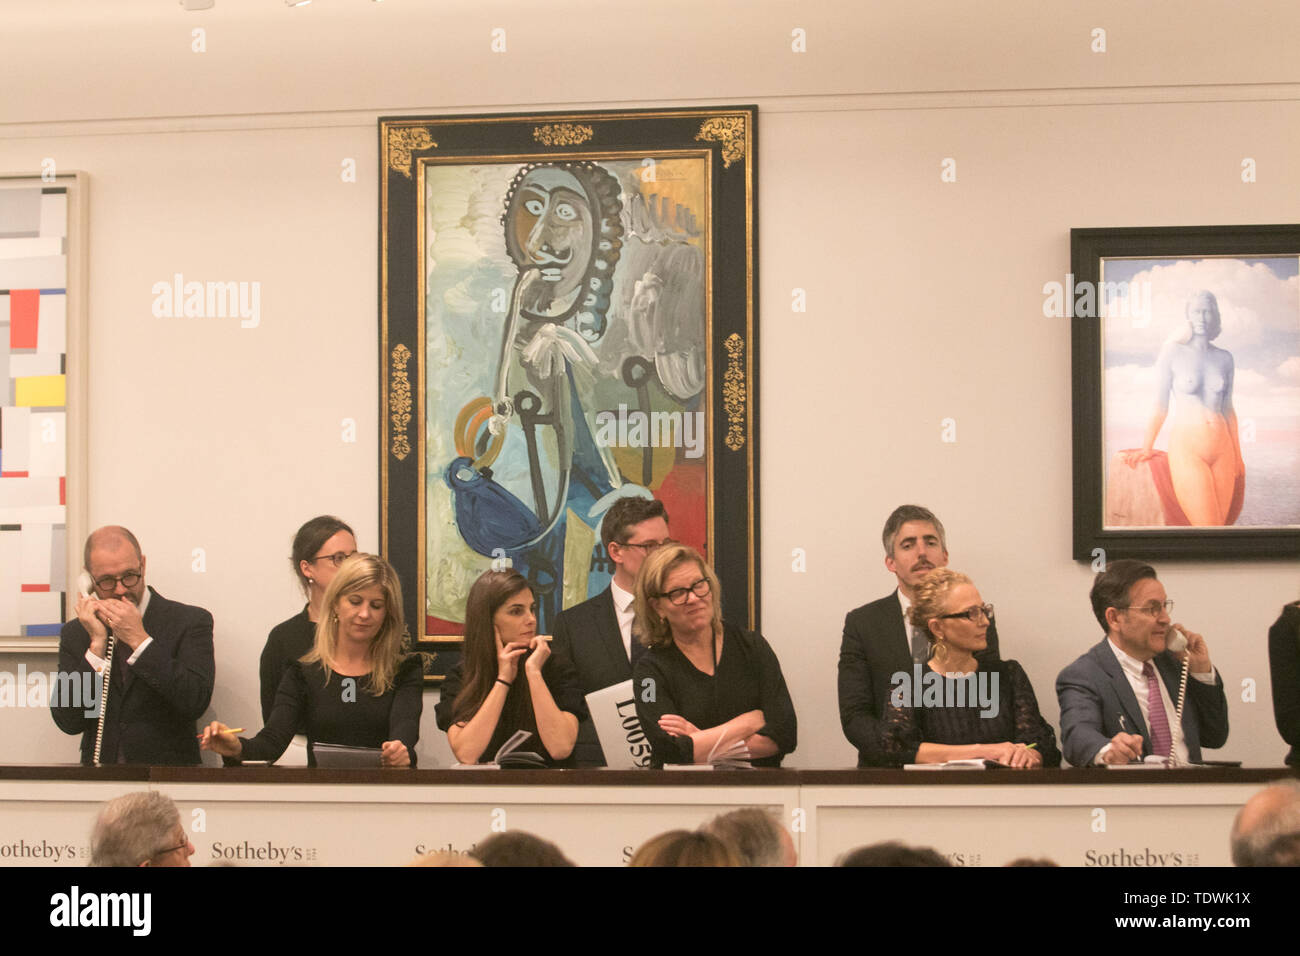 London UK. 19th June 2019. Sotheby's staff taking bids on the phone on behalf of clients  for 'Homme a la pipe' by Pablo Picasso',oil on canvas, Estimate £5,500,000, which sold at hammer for £6,500,000 at the Impressionist & Modern Art Evening Auction  at Sotheby’s London Credit: amer ghazzal/Alamy Live News Stock Photo